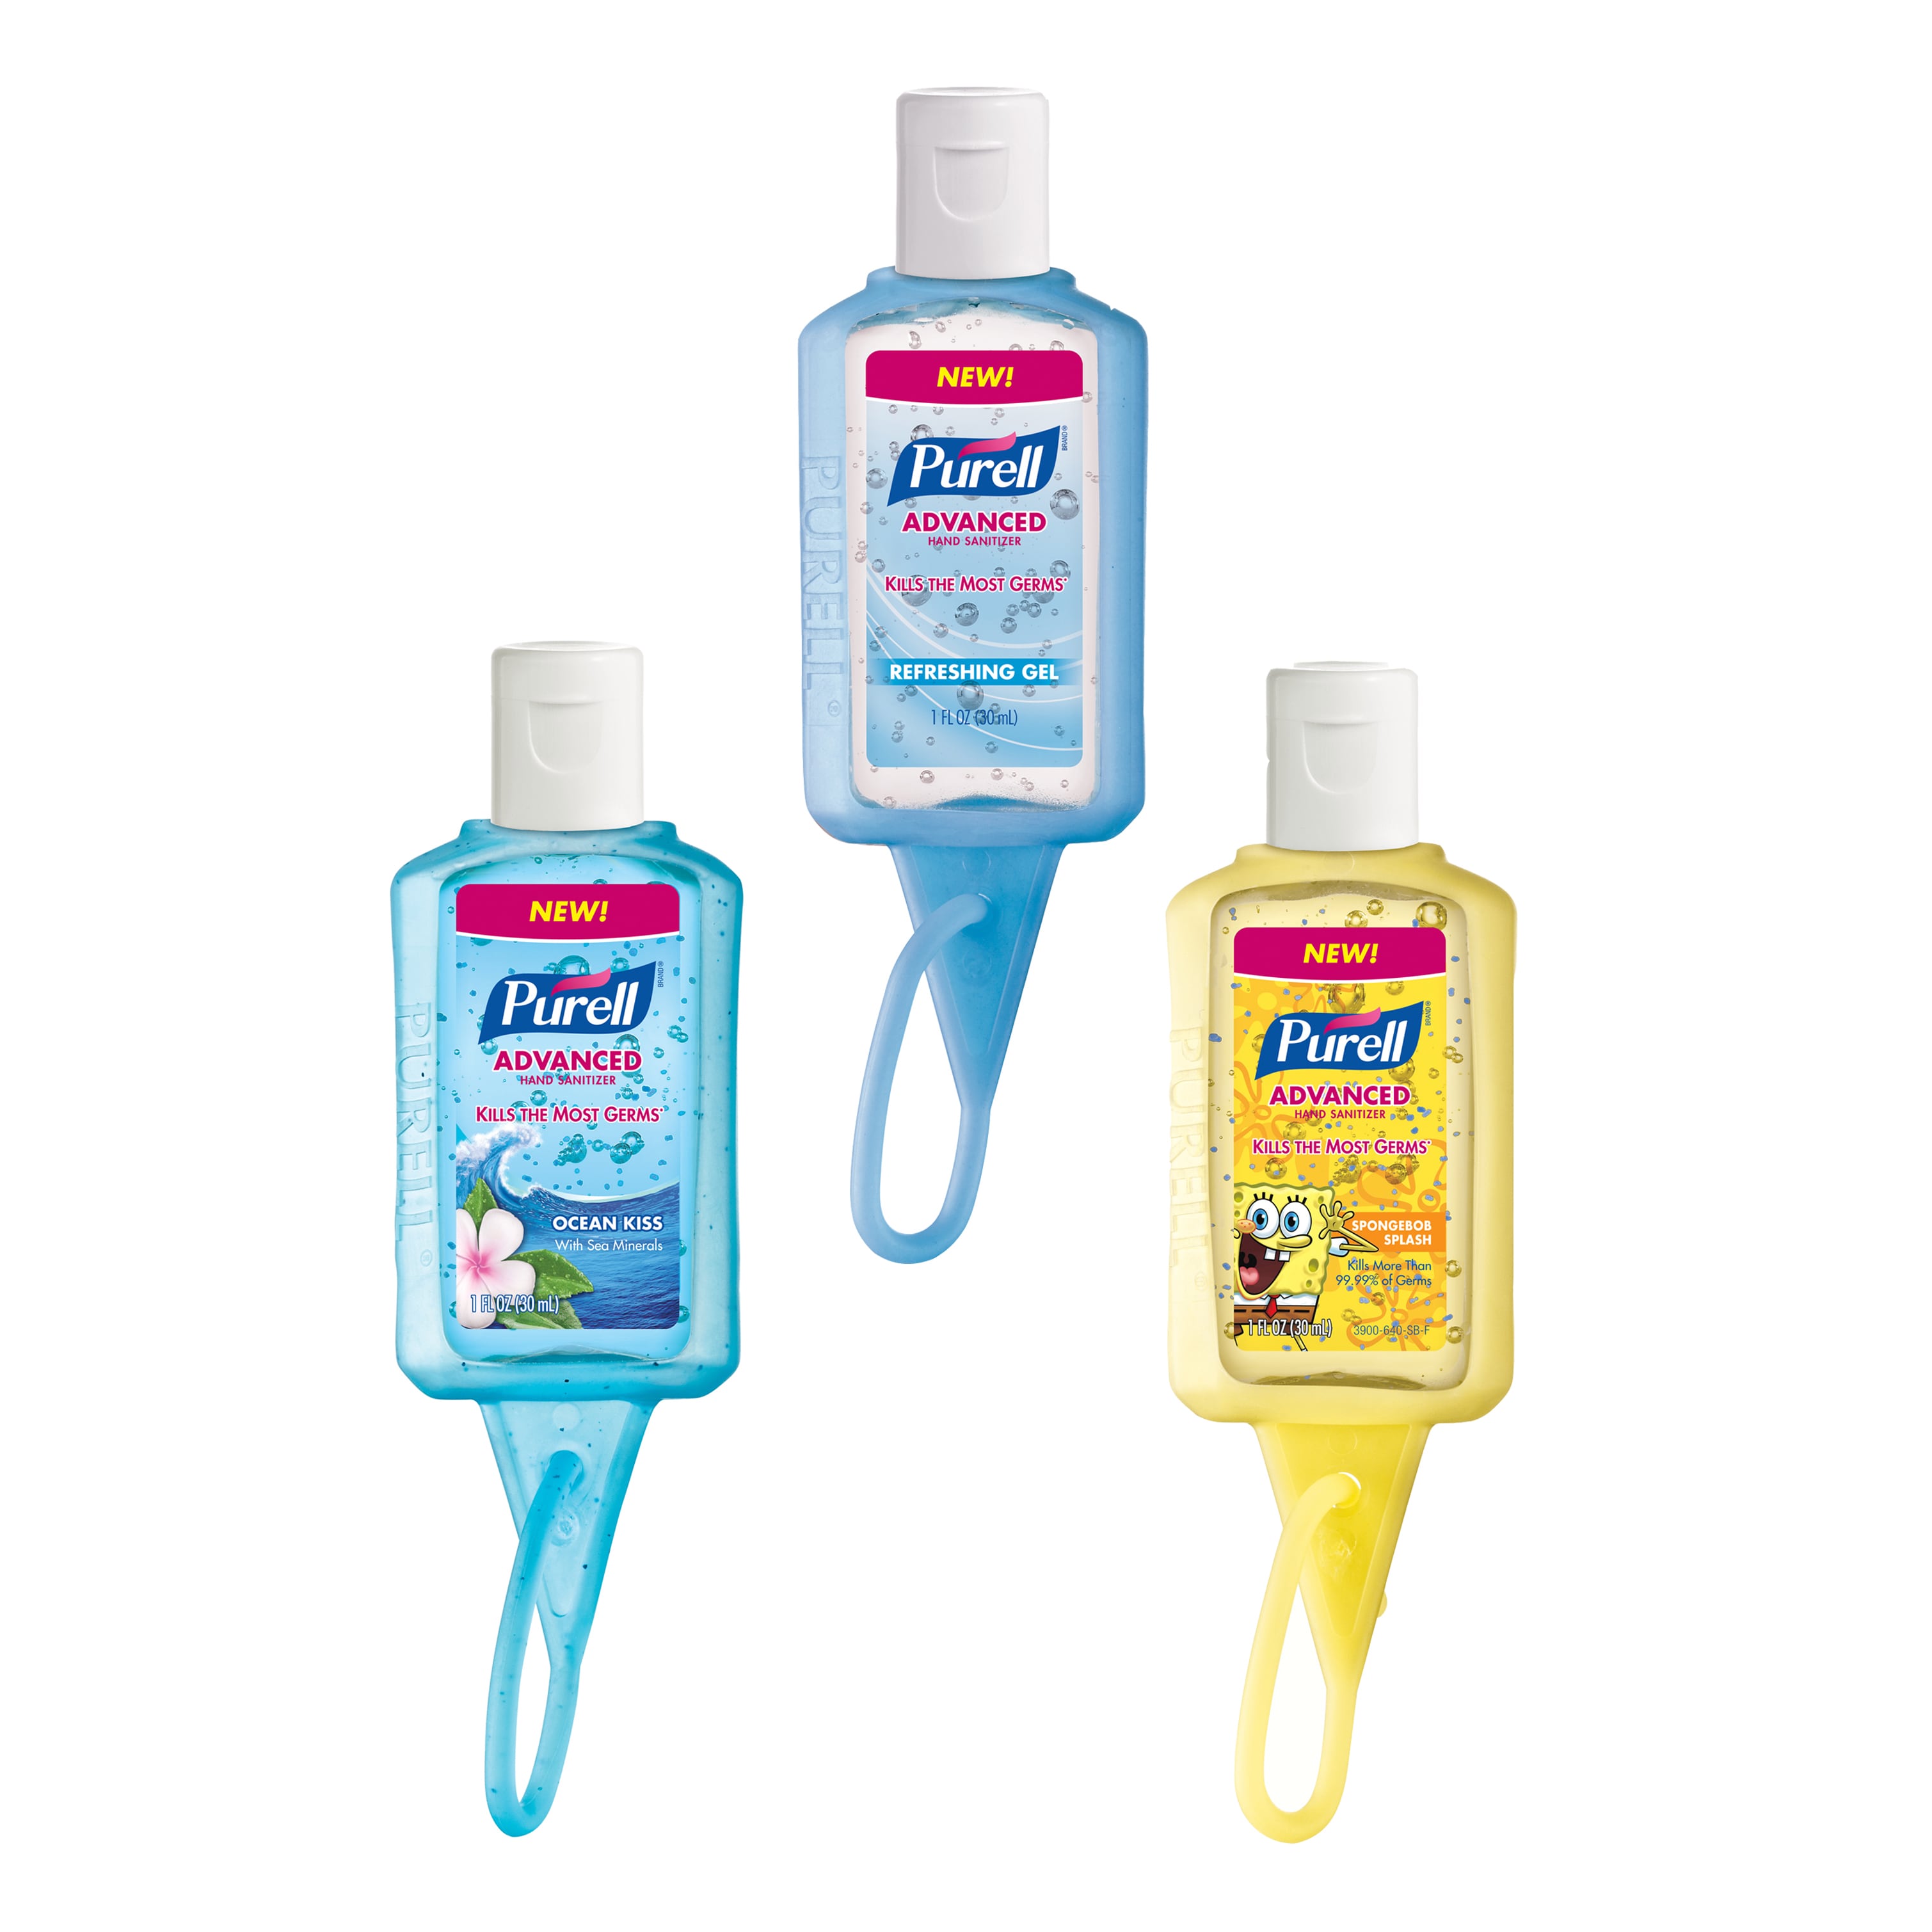 PURELL Advanced, 1 oz (Pack of 36) - image 1 of 2